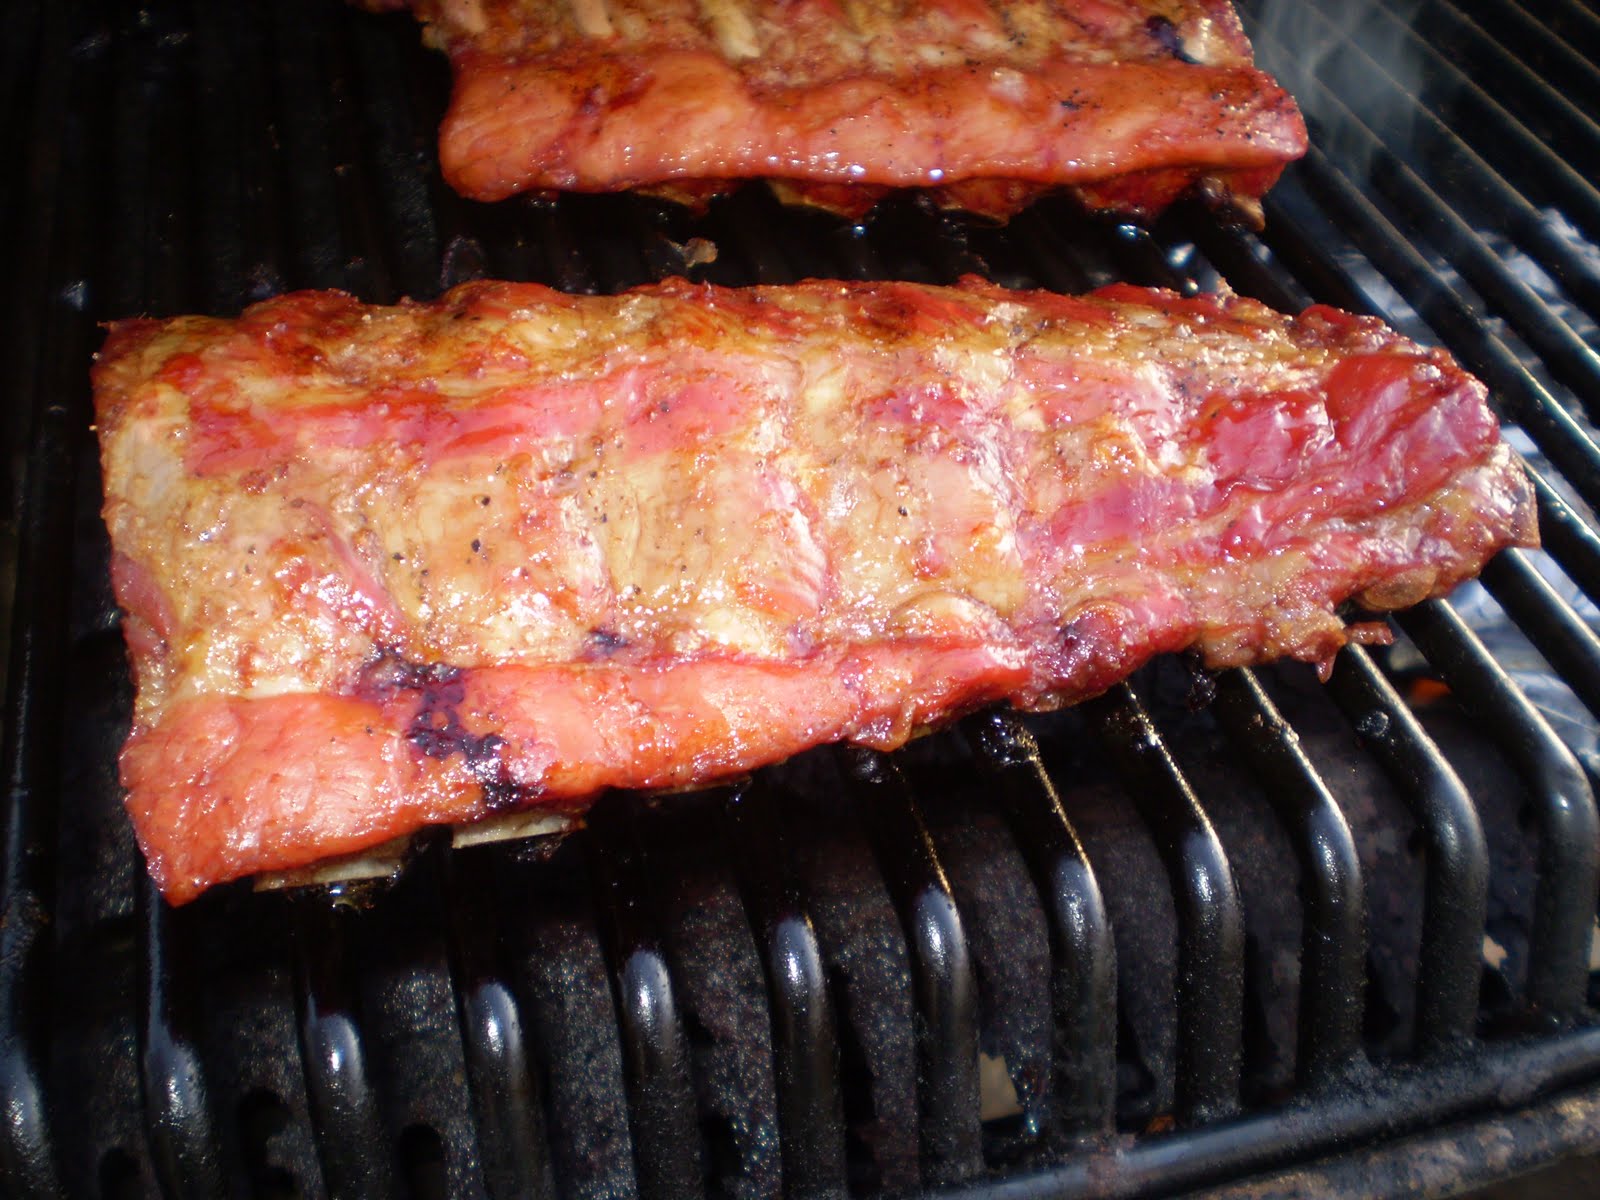 Side ribs smoking on the barbecue